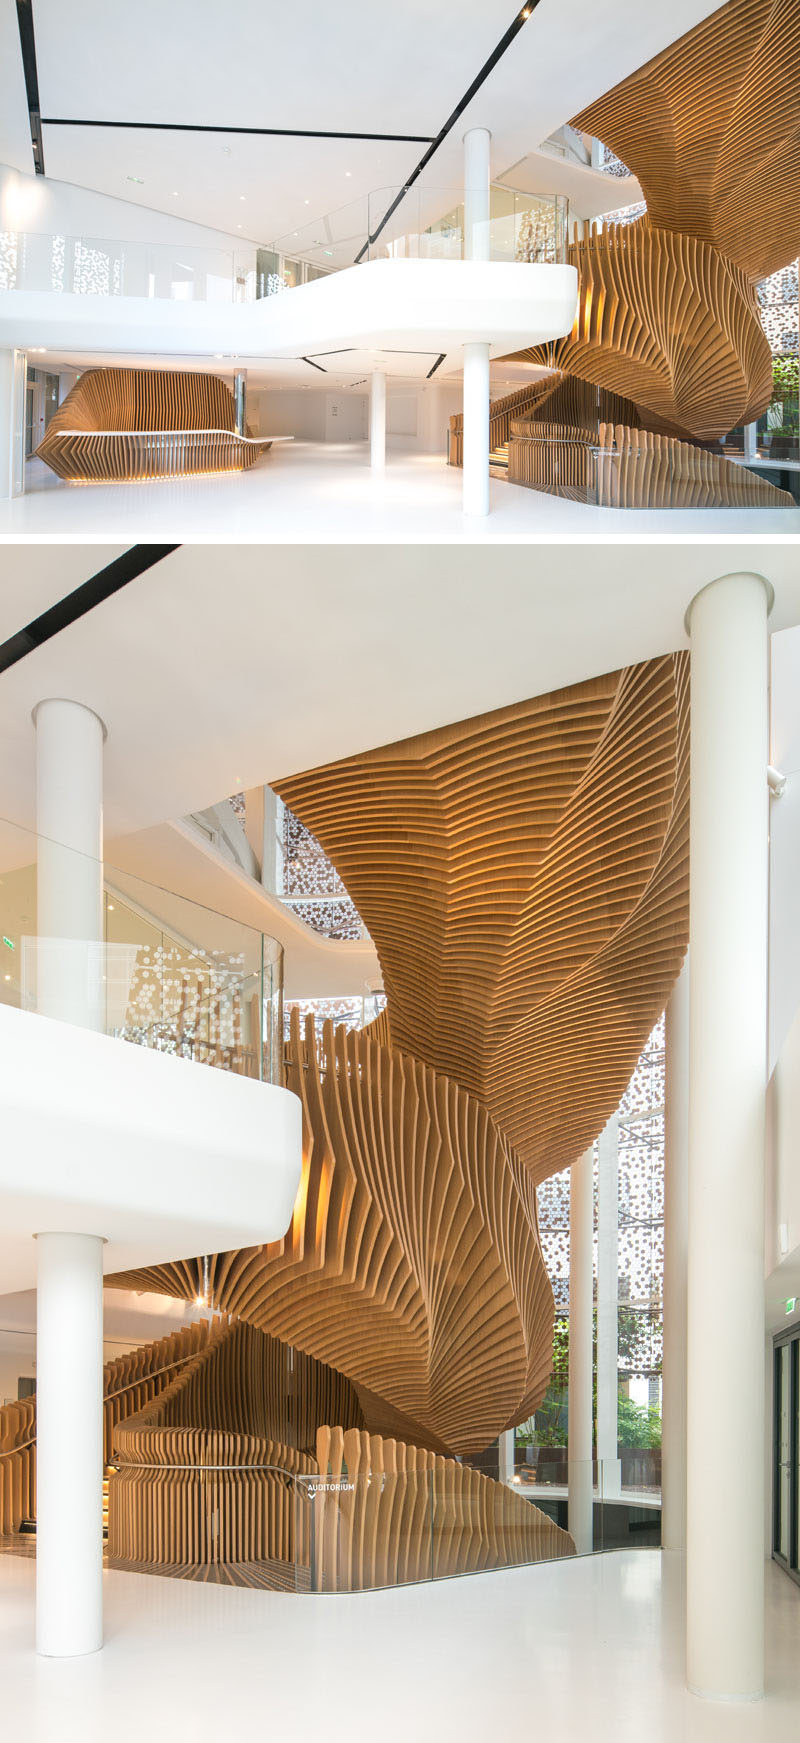 A Snake-like Sculptural Staircase Connects Four Floors Of This Office